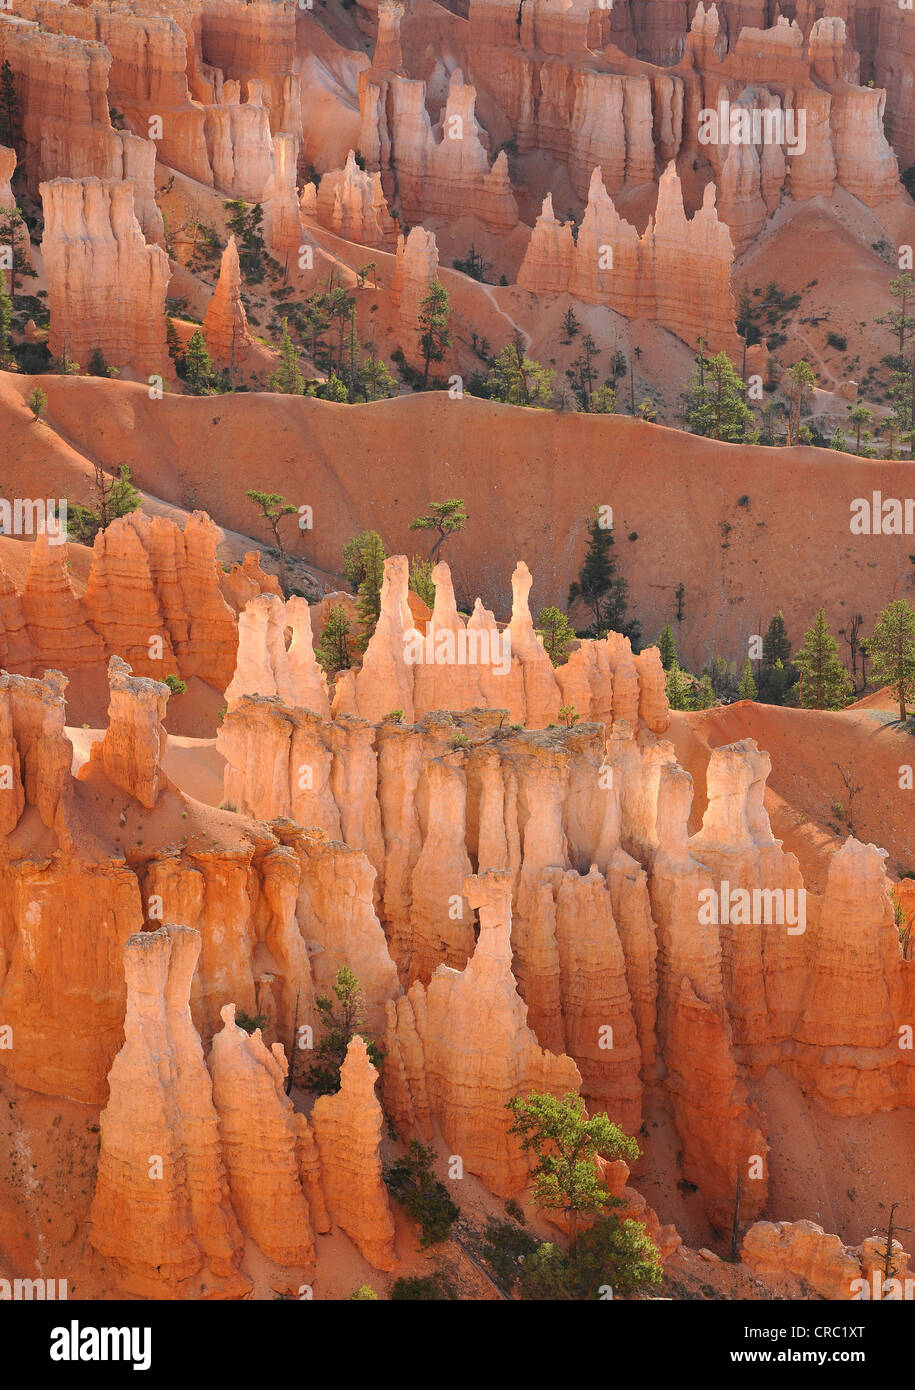 Rock formation, la reine Victoria, Queens Garden Trail, Sunset Point, Bryce Canyon National Park, Utah, United States of America Banque D'Images